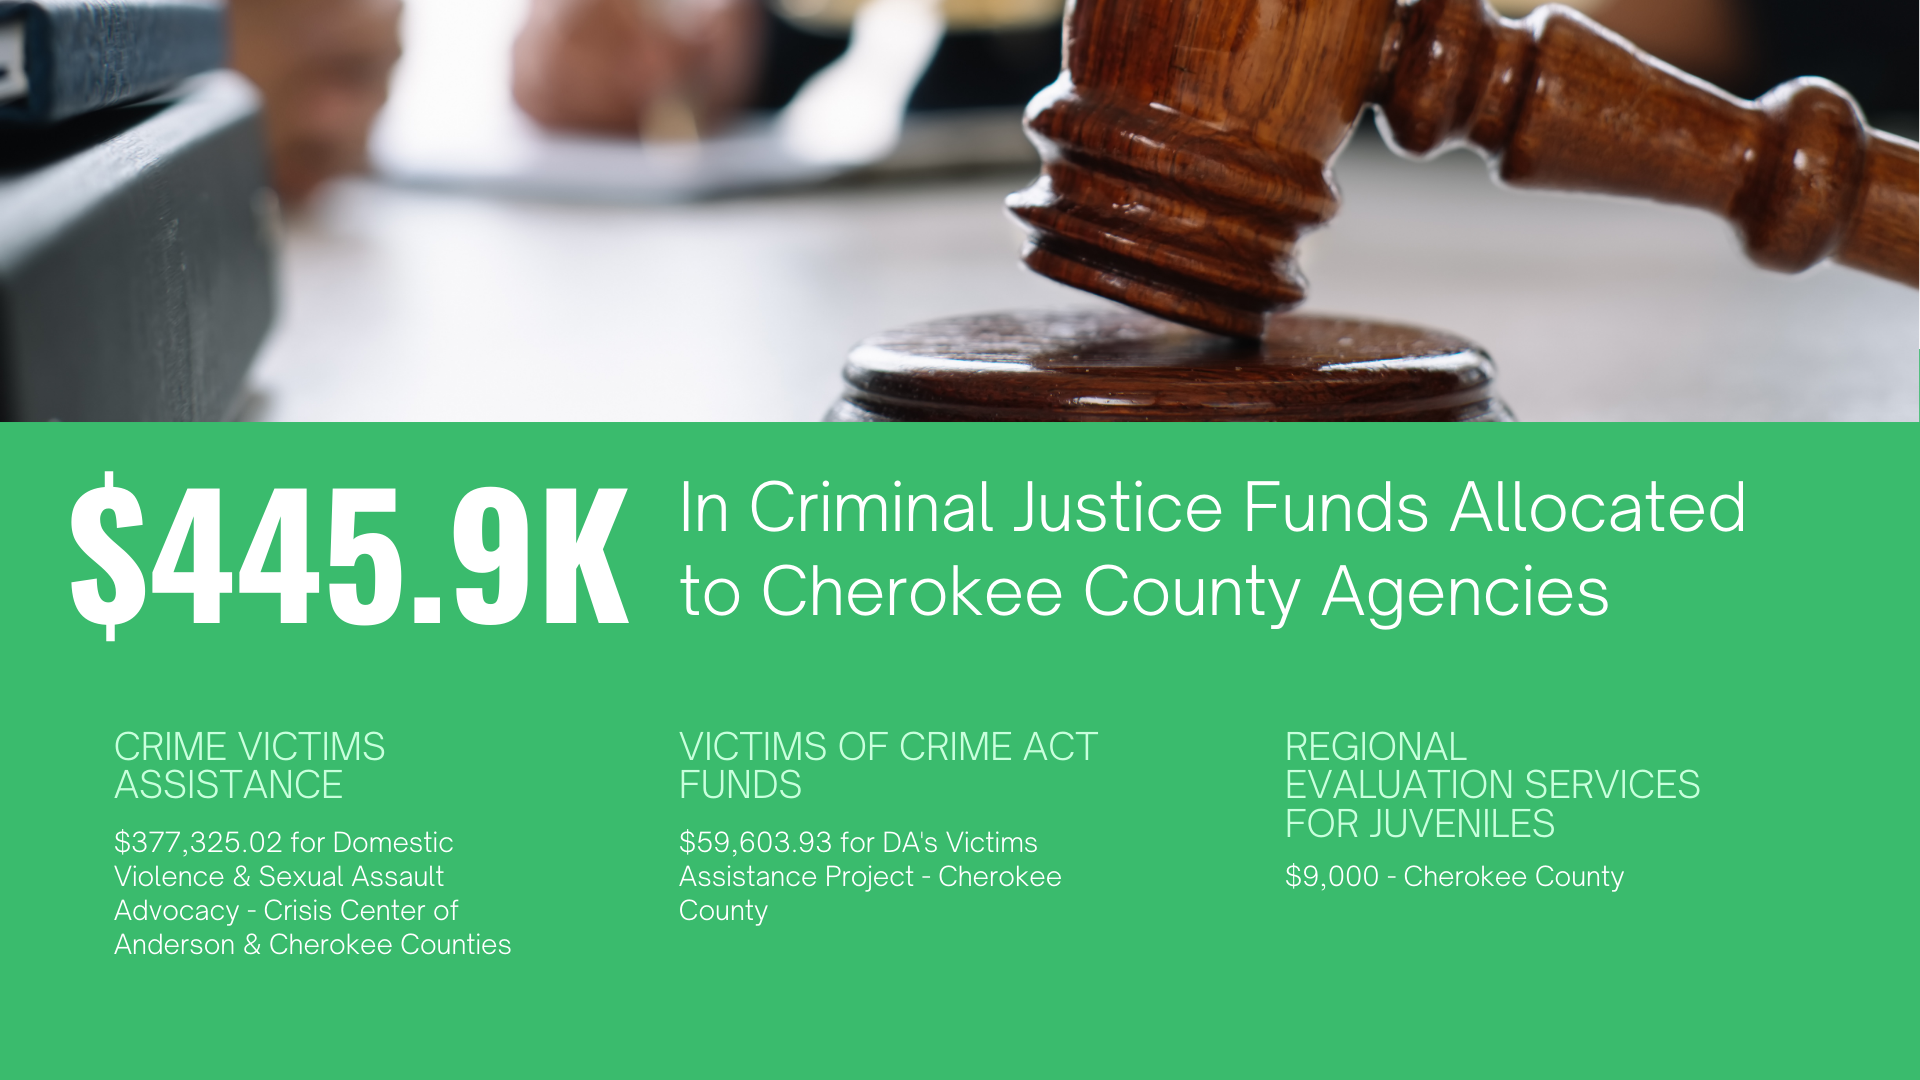 A poster for criminal justice funds allocated to cherokee county agencies